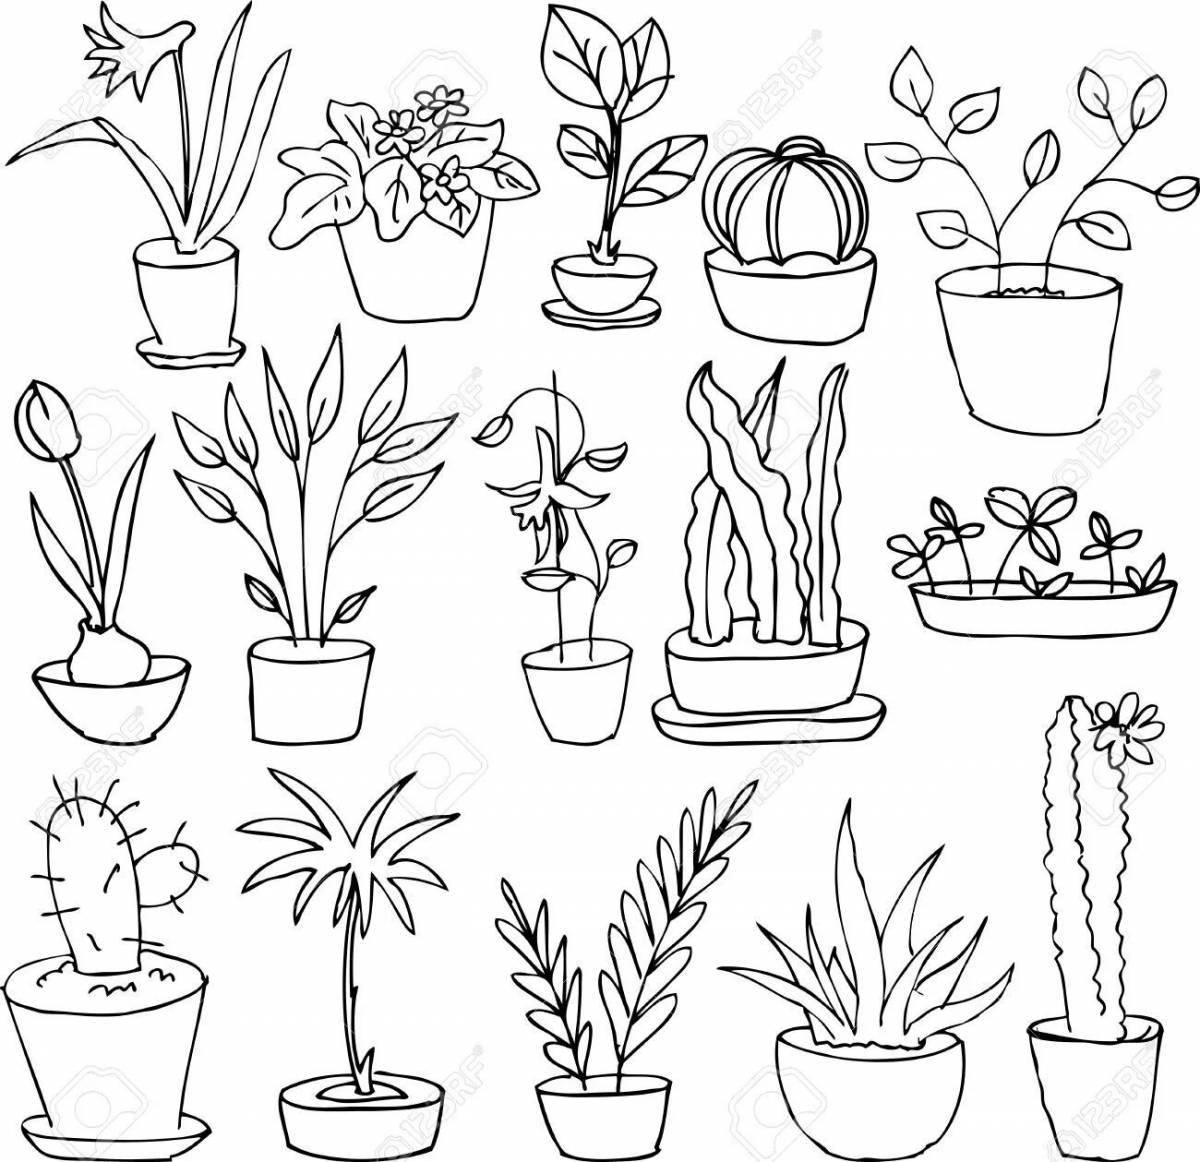 Charming coloring senior group indoor plants